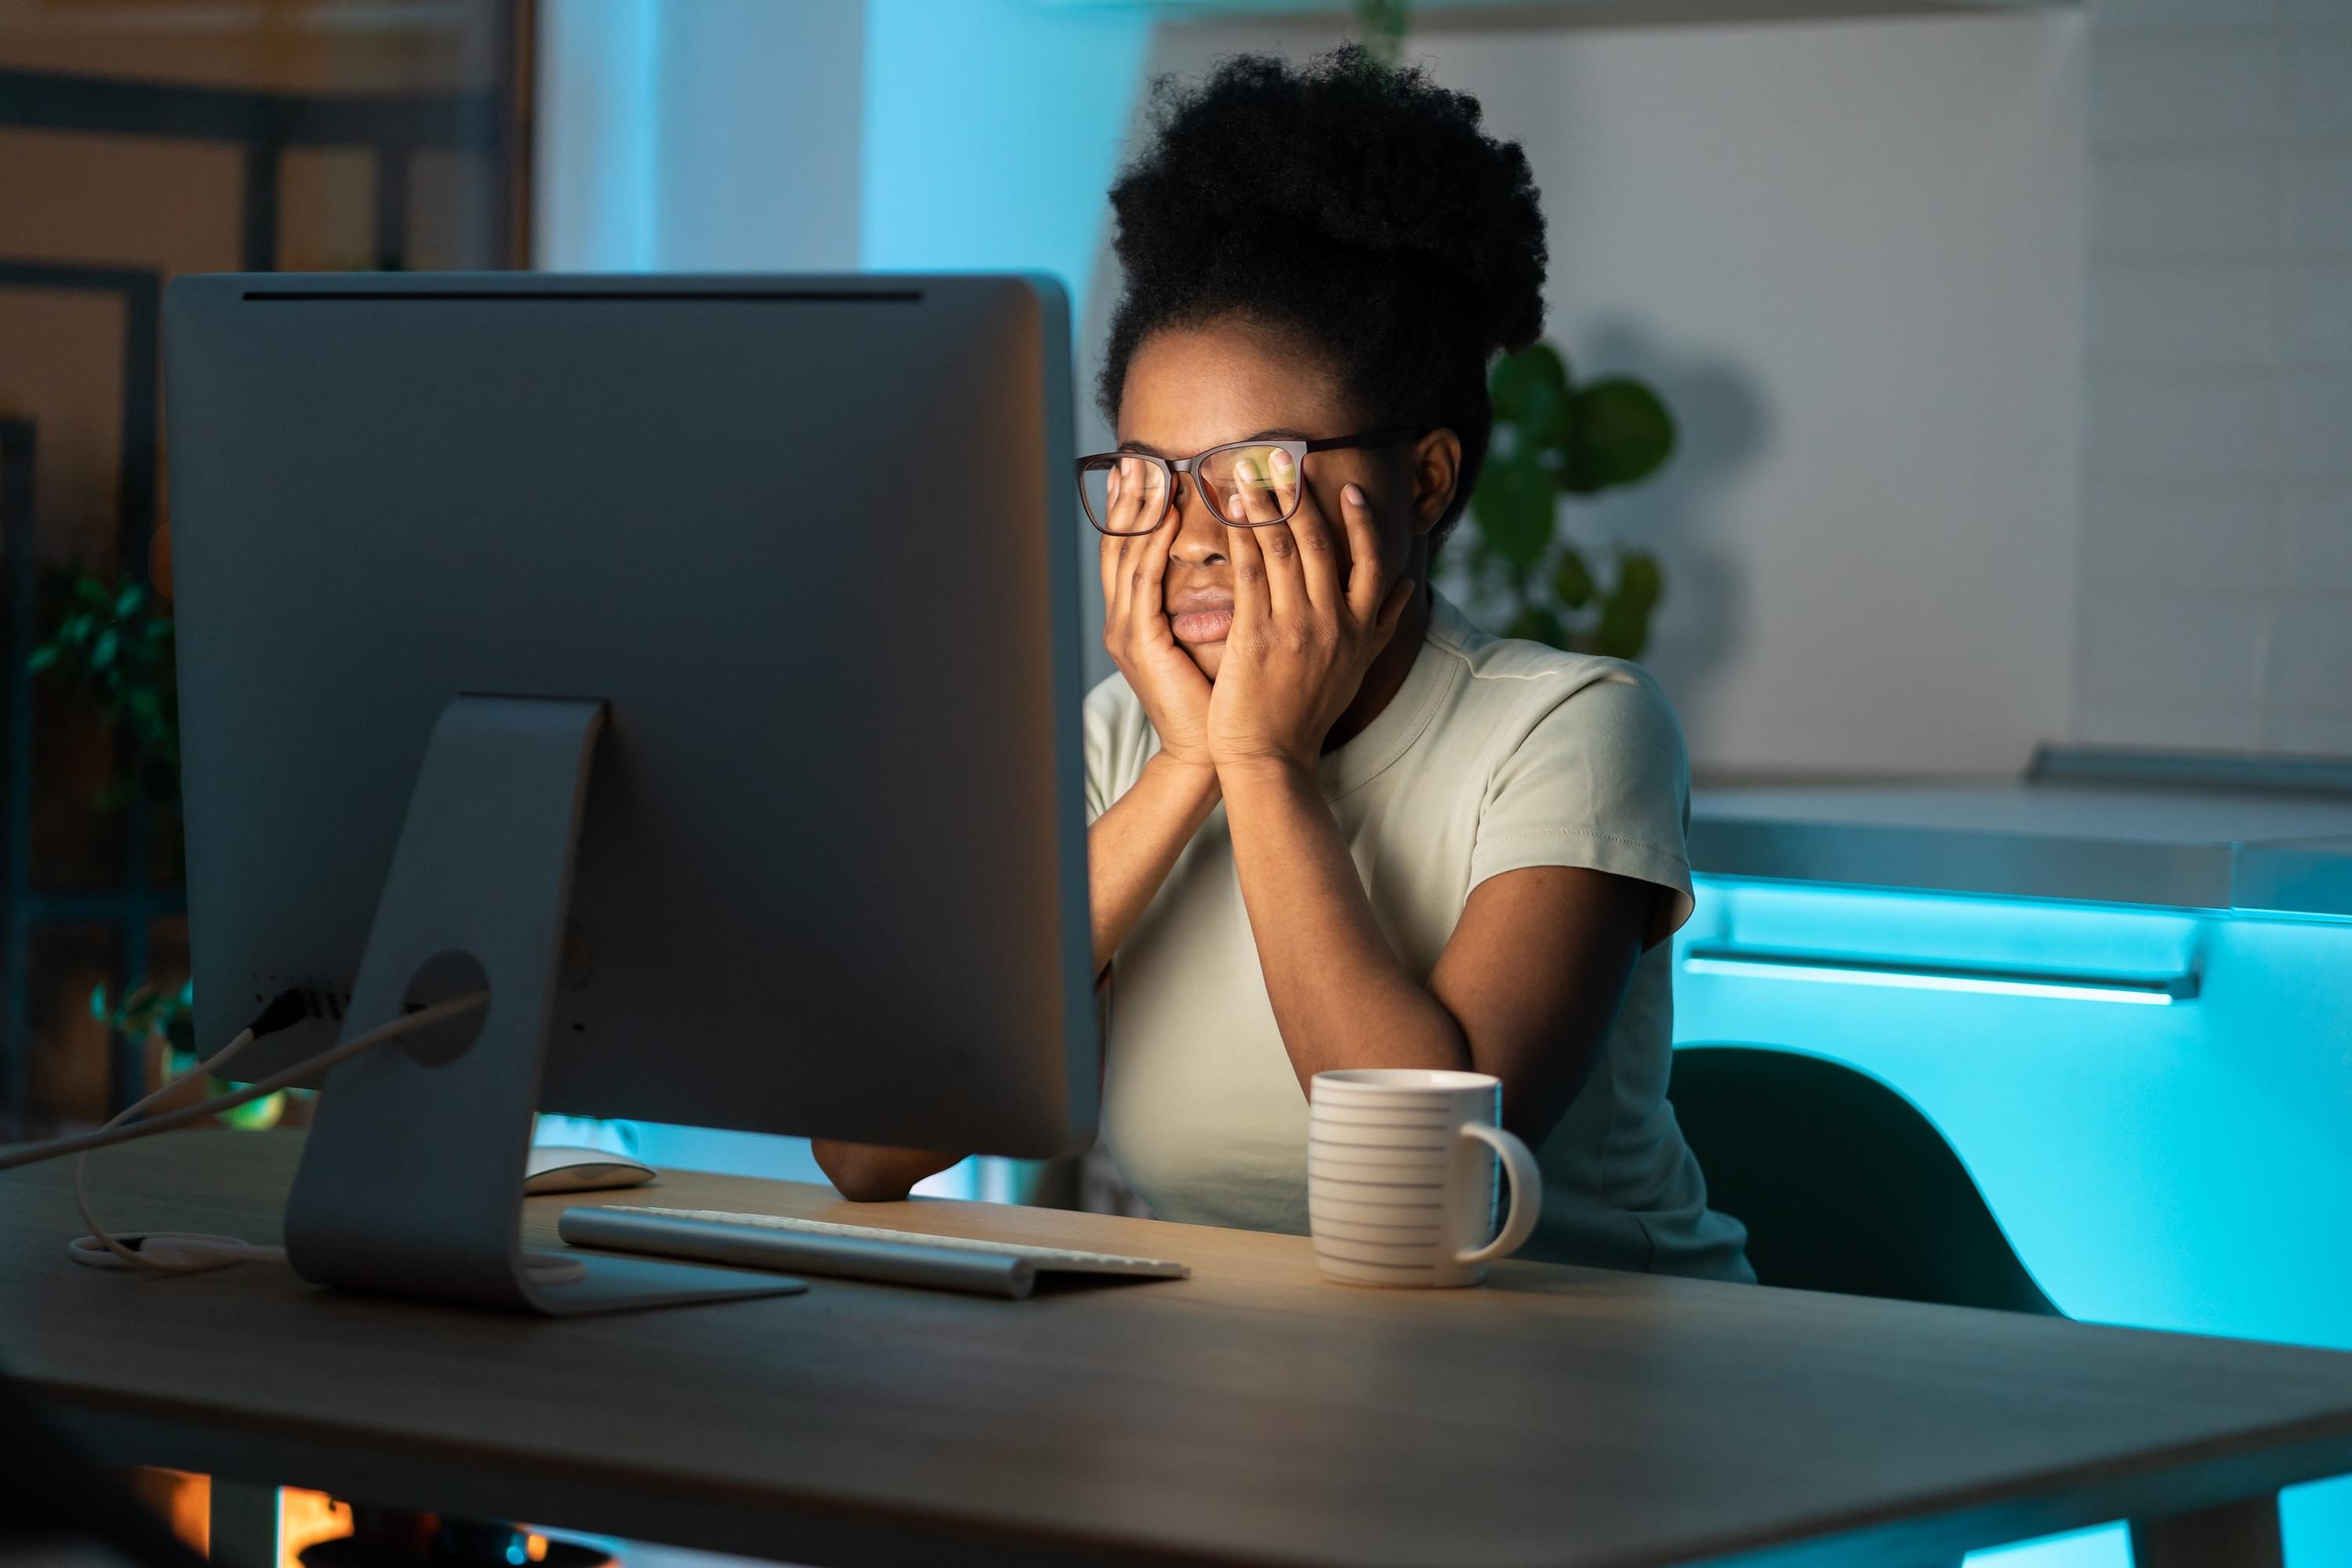 Female entrepreneur suffering through burnout at the computer in the dark.